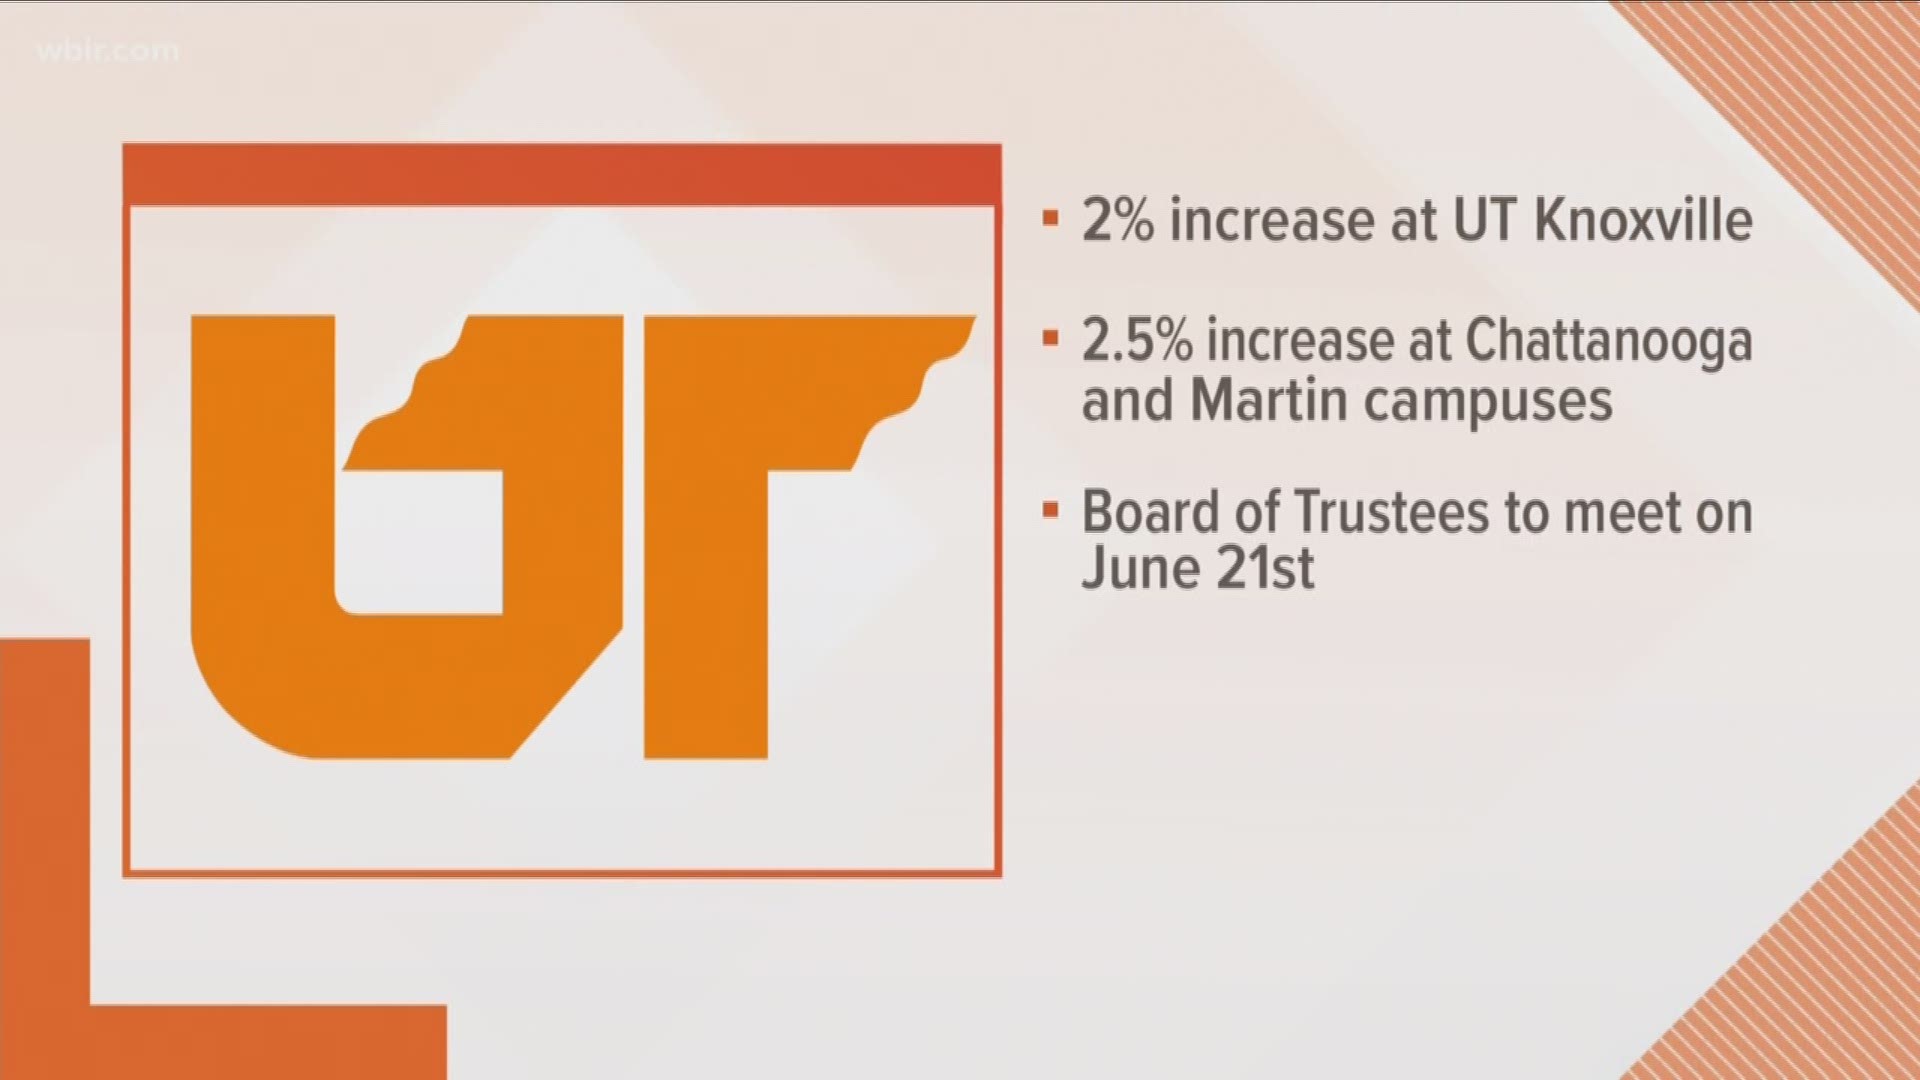 The Board of Trustees has proposed a 2 percent increase at UT Knoxville, and at 2.5 percent increase at Chattanooga and Martin campuses. There is also a proposed $26 increase to the student programs and services fee and a $10 increase to the library fee.